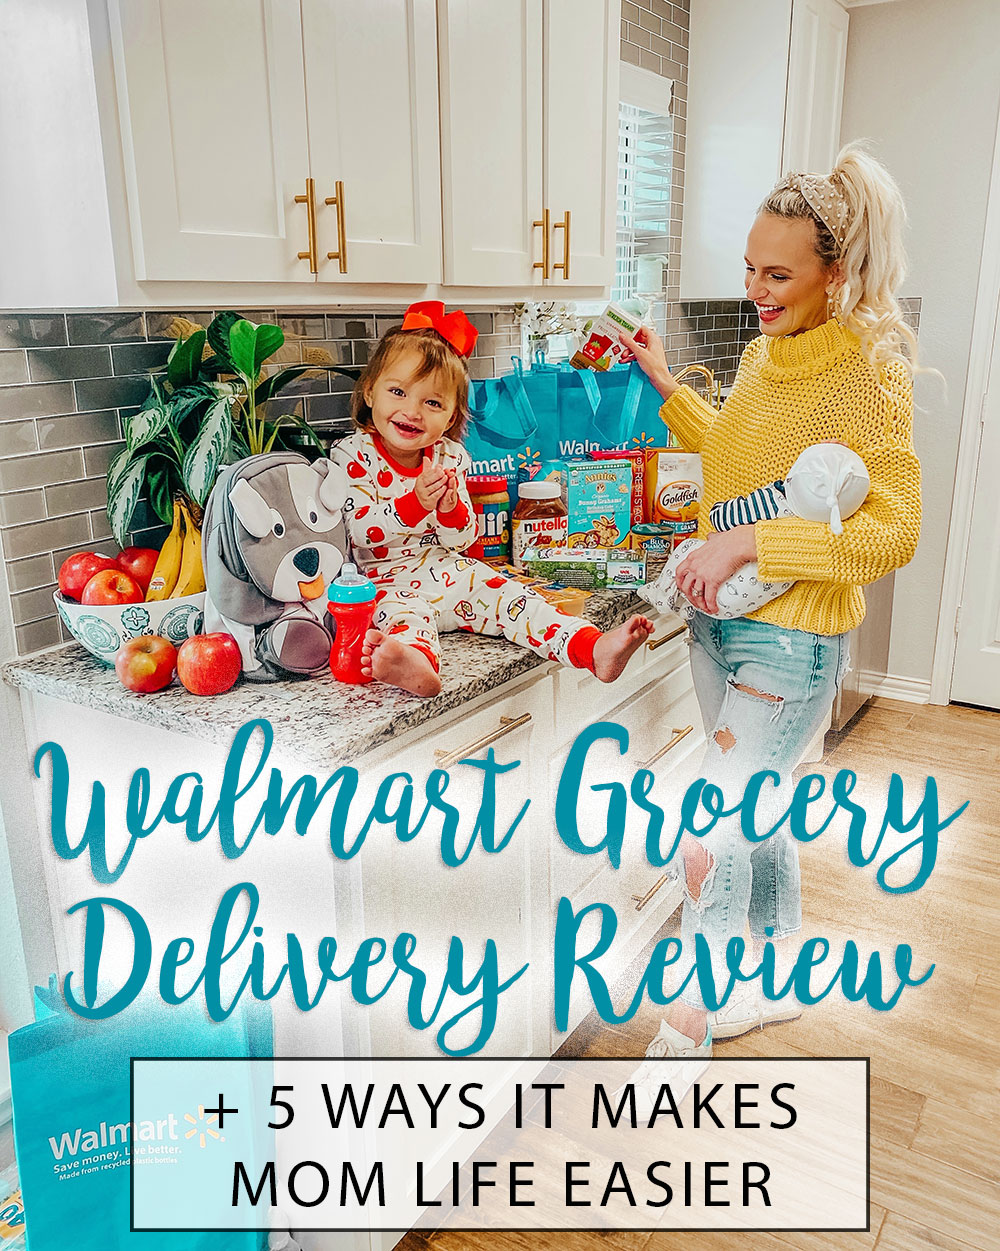 https://vandifair.com/wp-content/uploads/2020/09/walmart-grocery-delivery-review-and-five-ways-it-makes-mom-life-easier.jpg